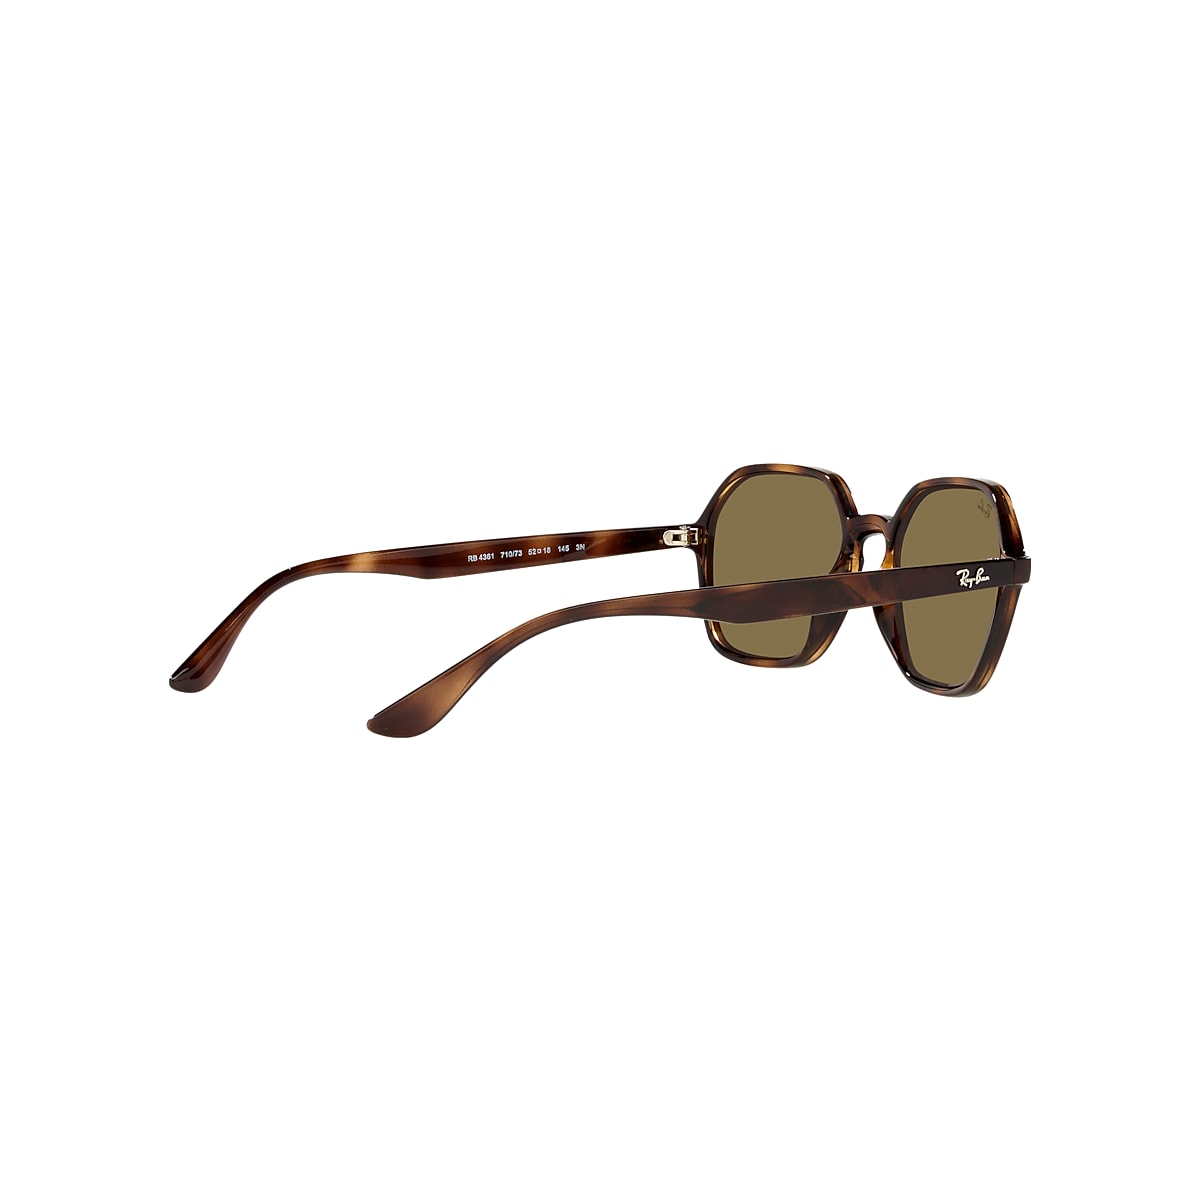 RB4361 Sunglasses in Havana and Dark Brown - RB4361 - Ray-Ban